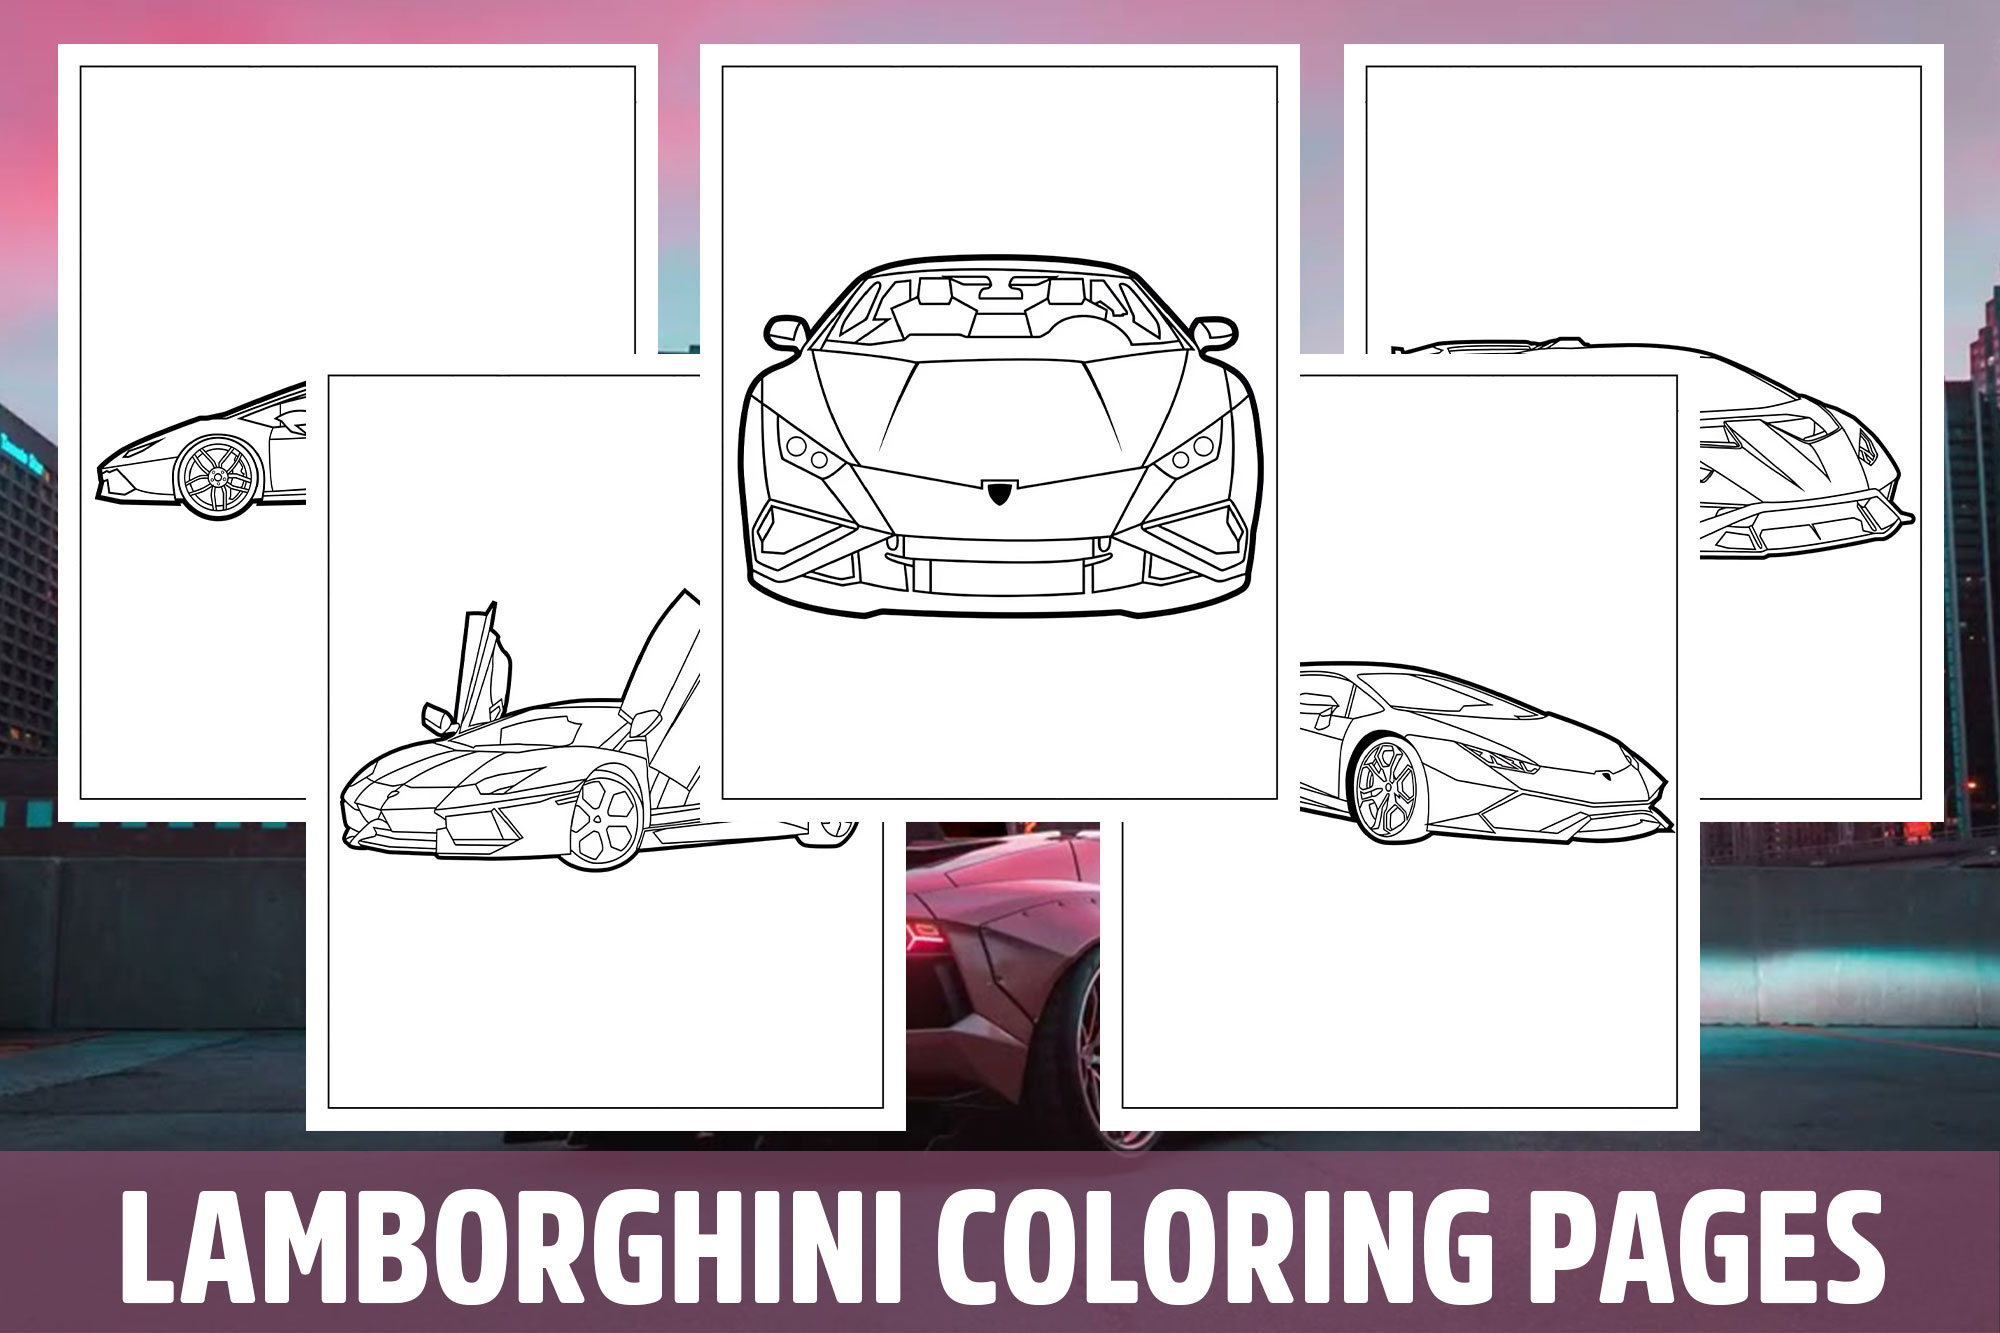 Lamborghini coloring pages for kids girls boys teens birthday school activity made by teachers